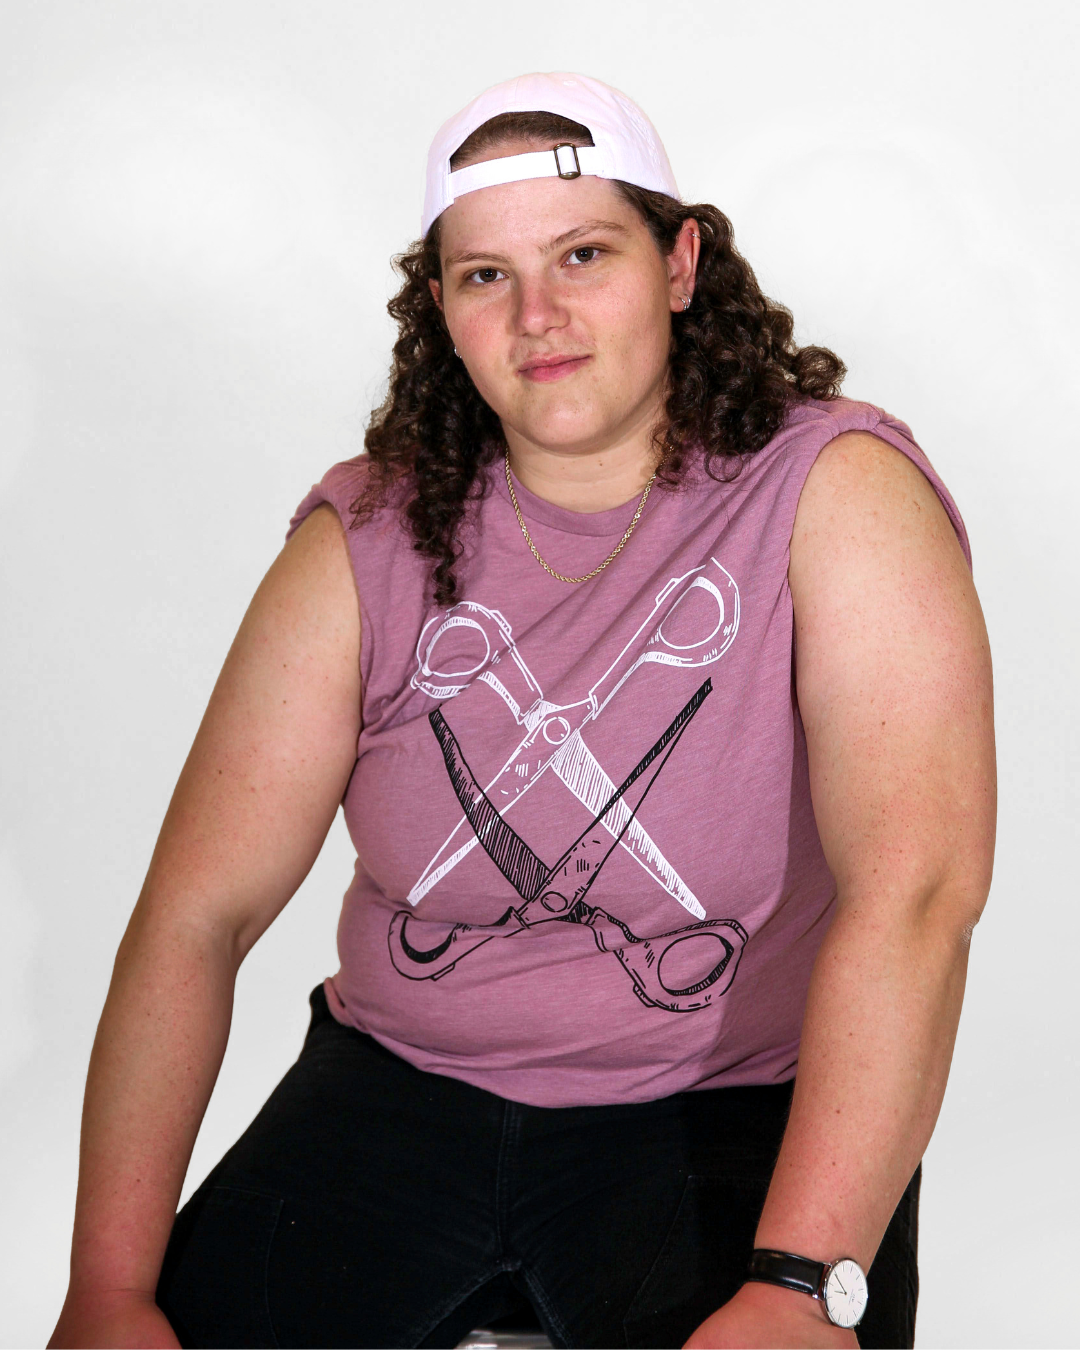 Model Jenny is wearing the Basic Scissoring Pink Tee in size S. They are 5'9" and their bra size is 38DDD. The tee is a dusty pink color with a graphic of two scissors in a vertical alignment. Their blades are open and overlapping each other. The top scissor is outlined in white and the bottom scissor in black.